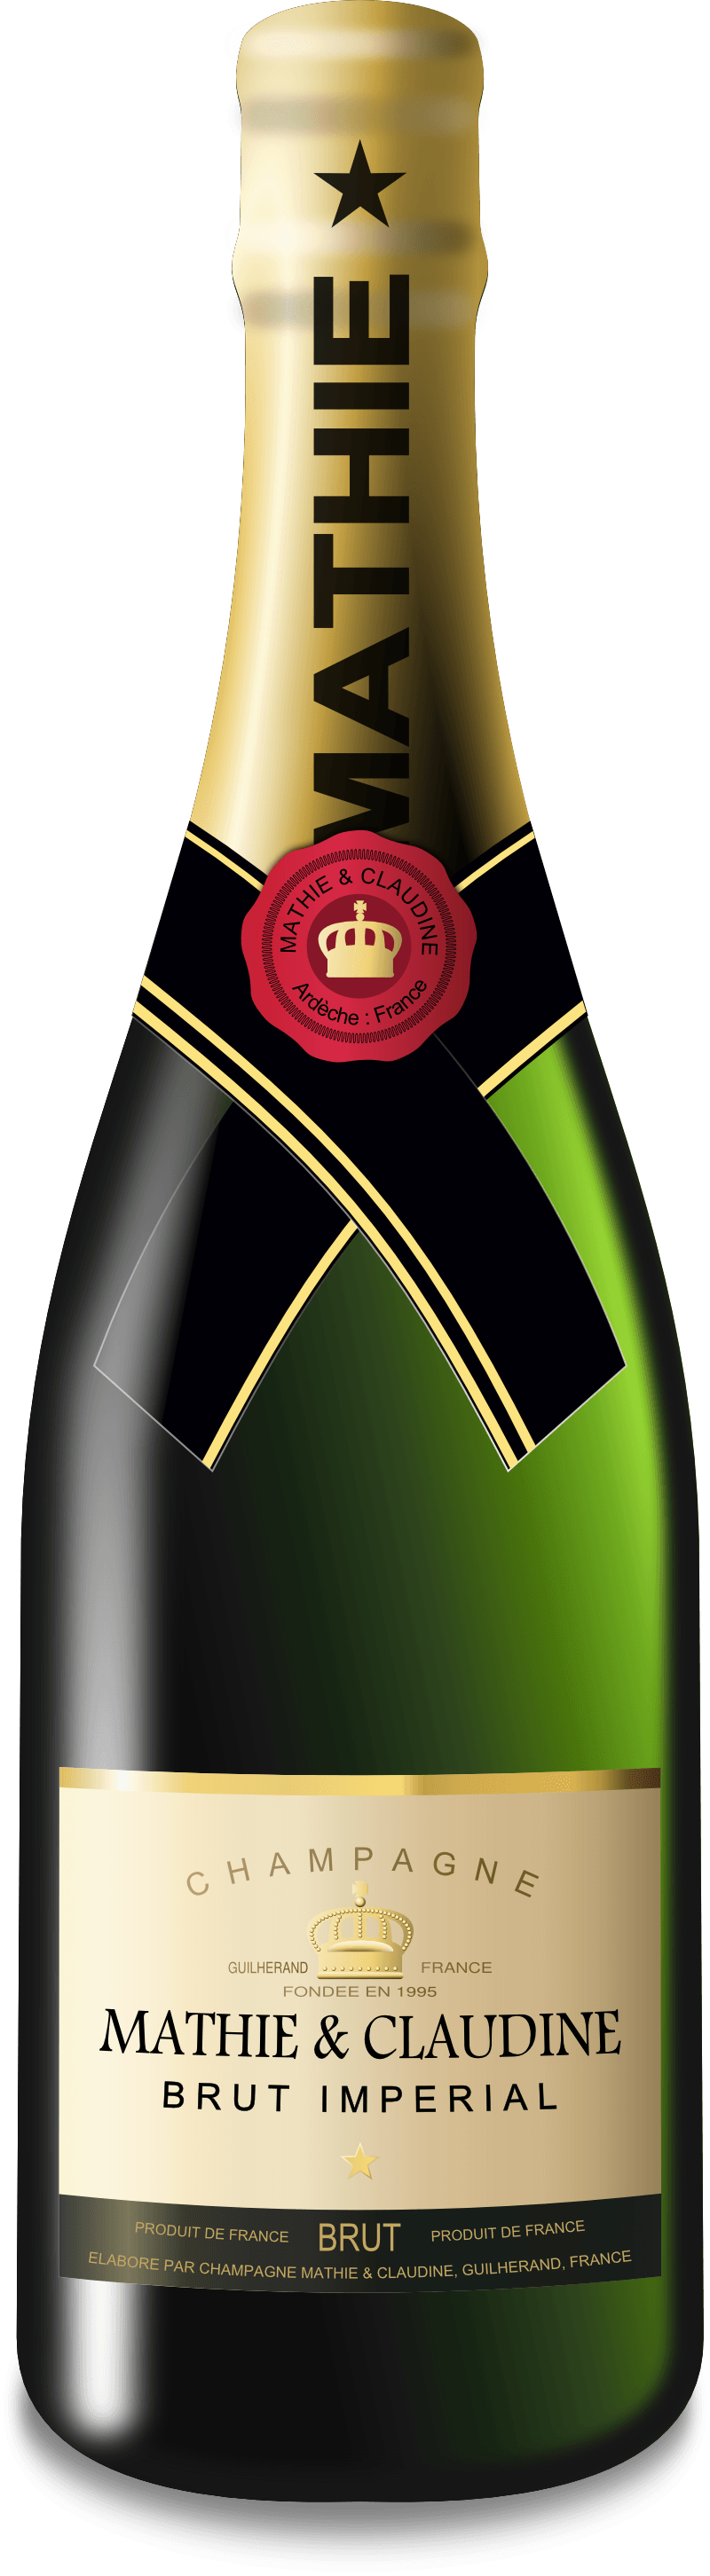 Champaign Bottle Png Image PNG Image